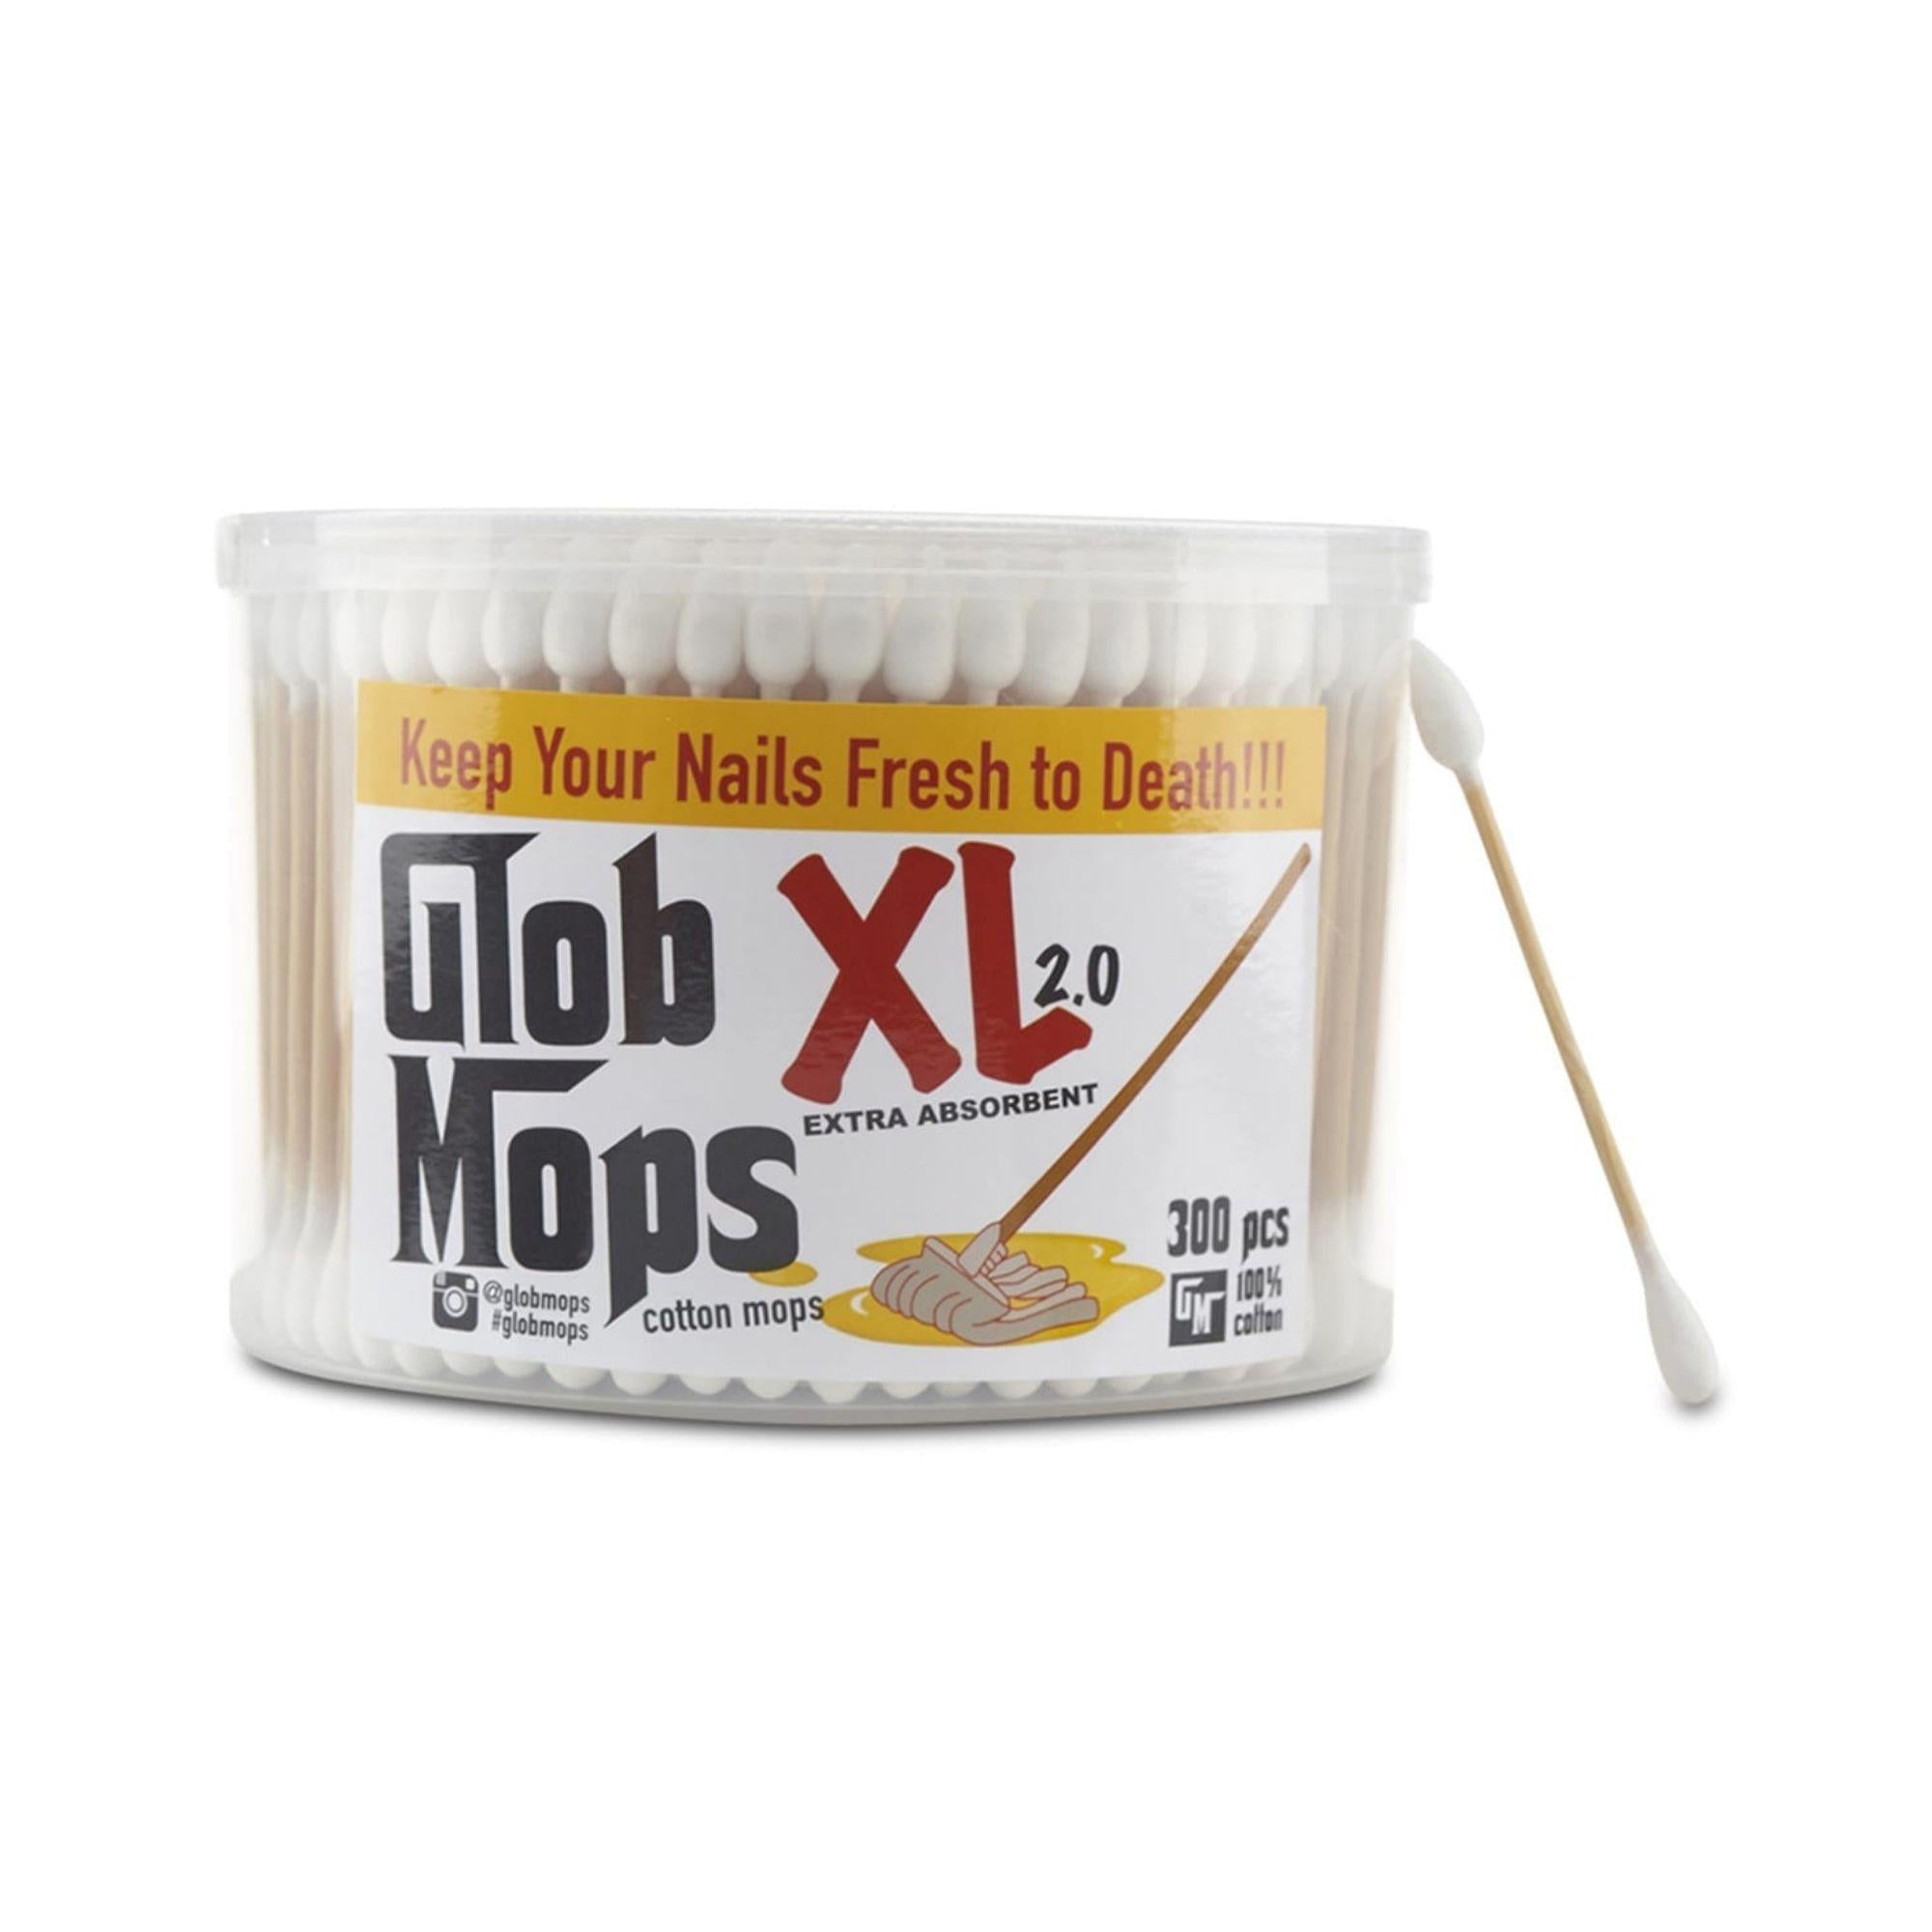 Glob Mops XL 2.0 Cotton Mop Cleaners